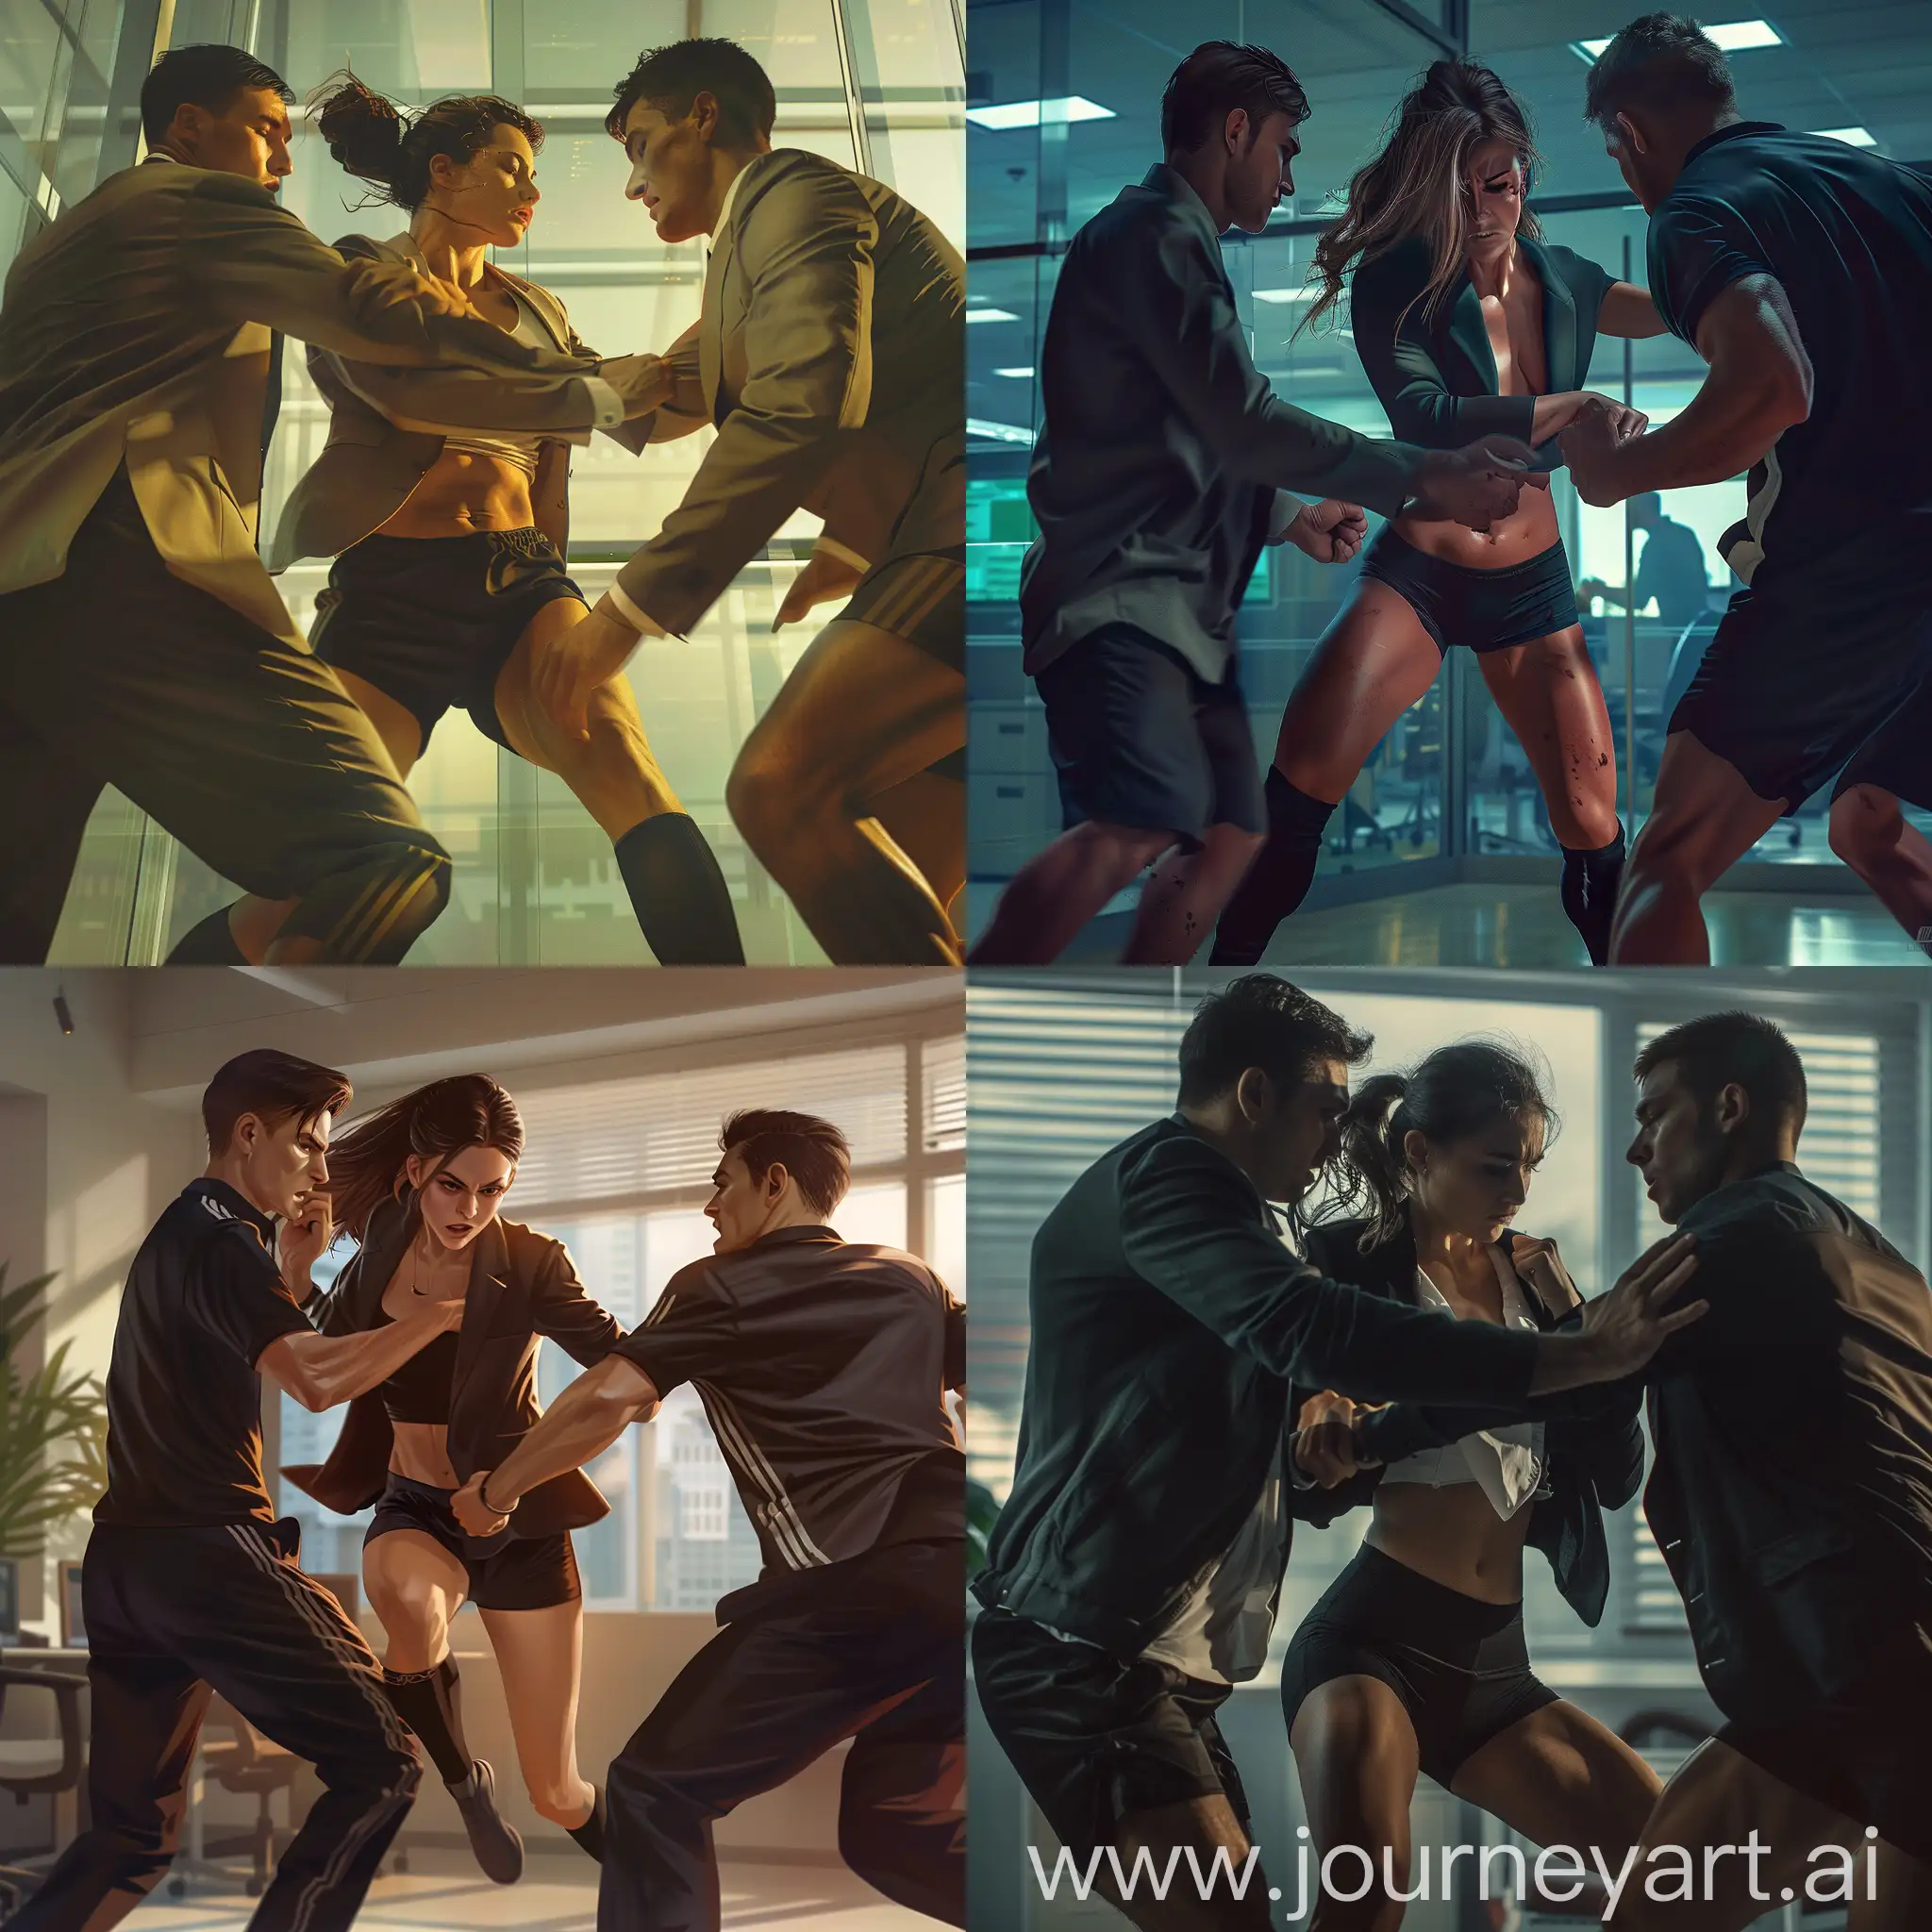 IT company office, reception zone. A young muscular woman in (formal suit jaket, black shorts, ((adidas black overkneesocks))) attacked by two male in sport clothing. The woman is struggling and trying to defend herself but is clearly outmatched. Realistic style, dramatic lighting, intense action scene.
